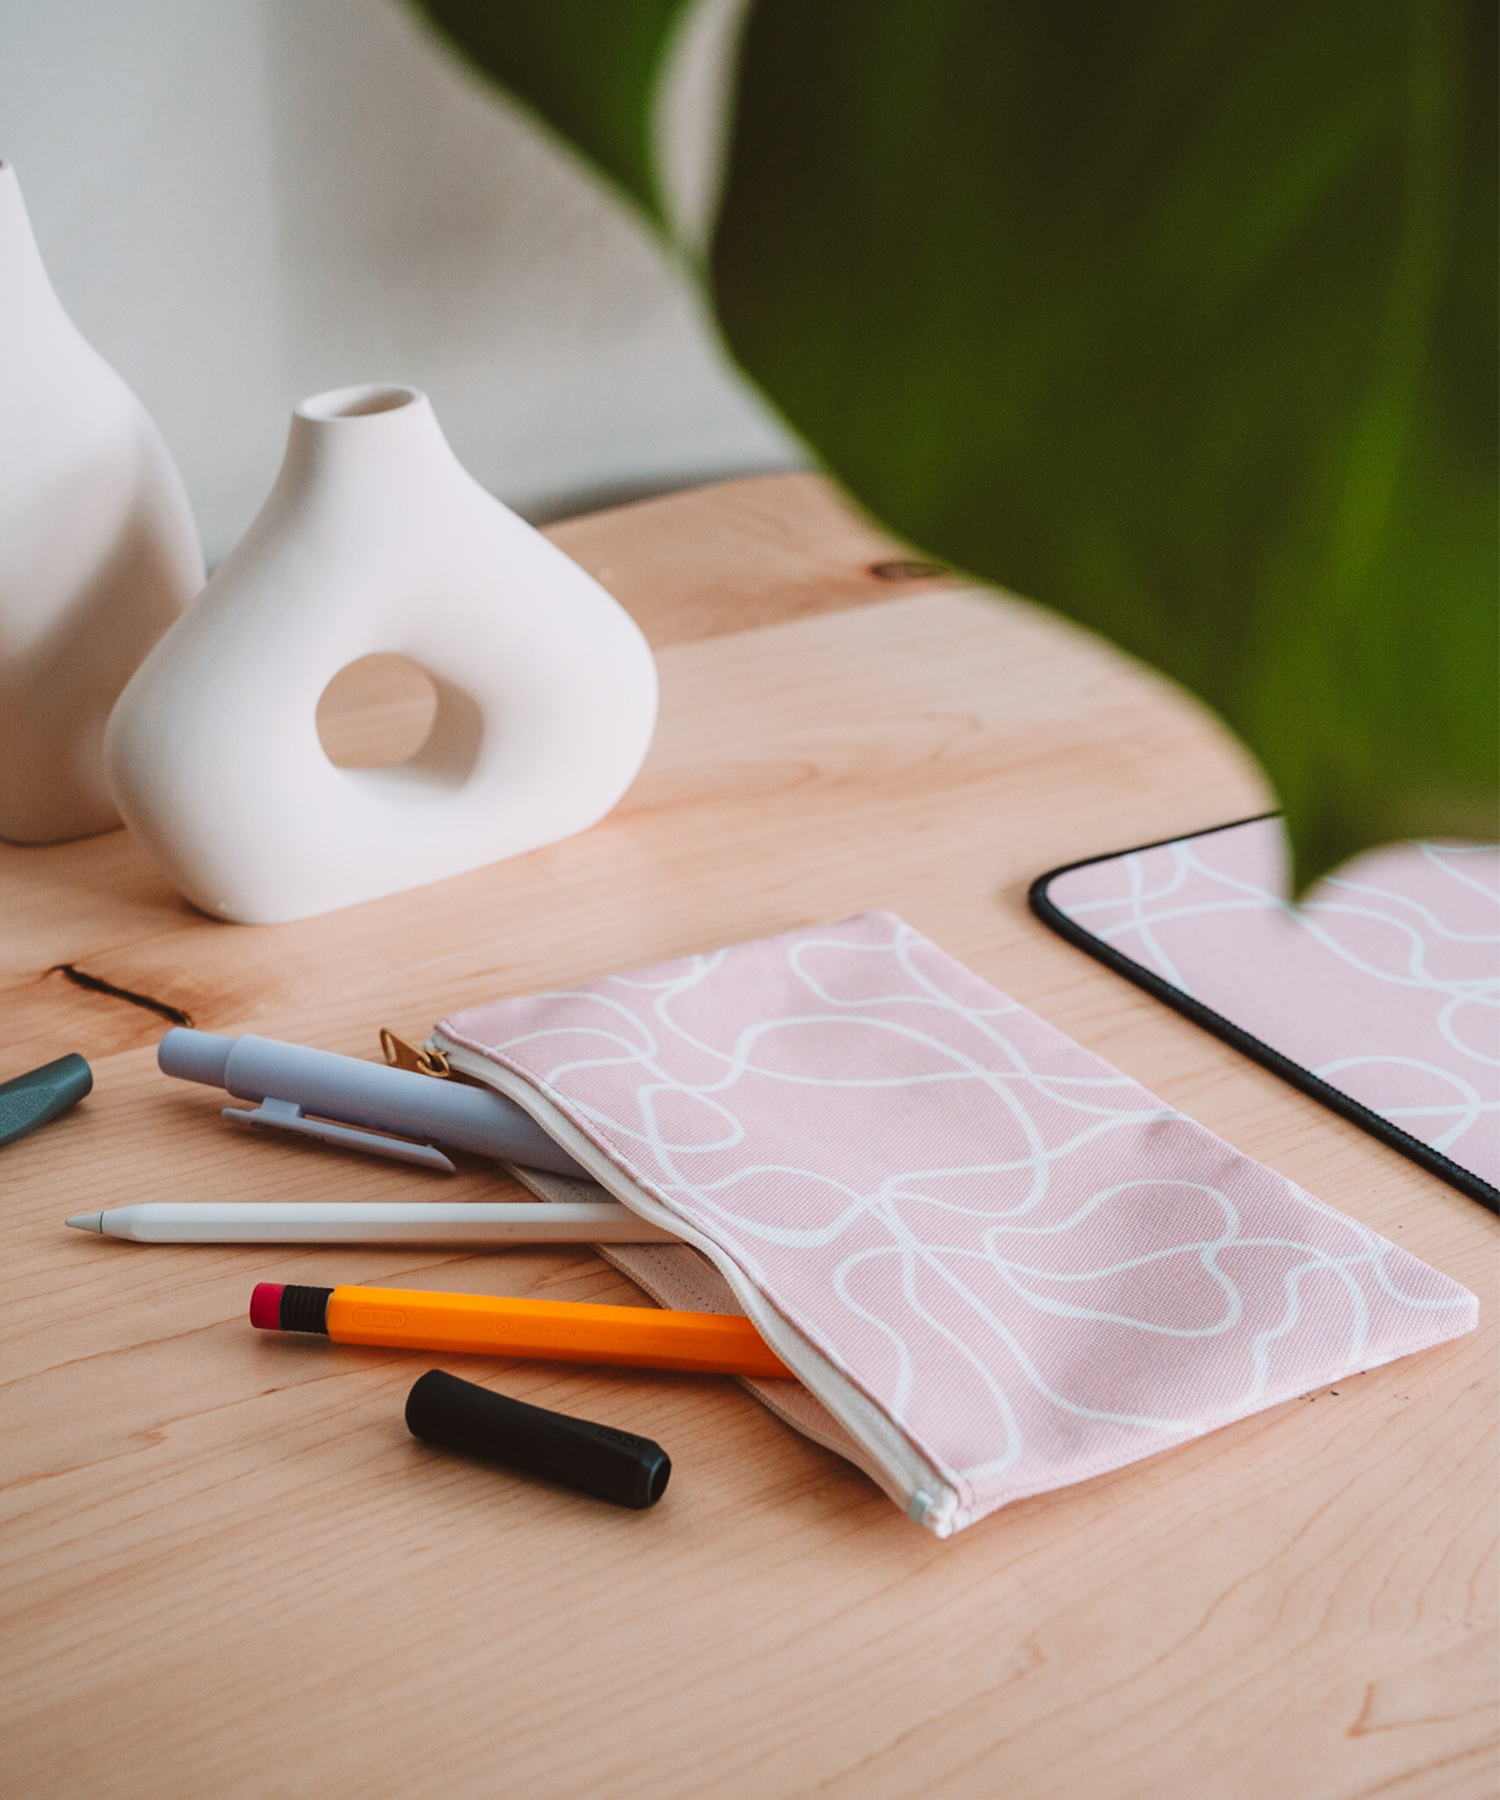 The Terrain accessory pouch is spilling out Apple Pencil accessories on a desk with two asymmetrical vases in the background